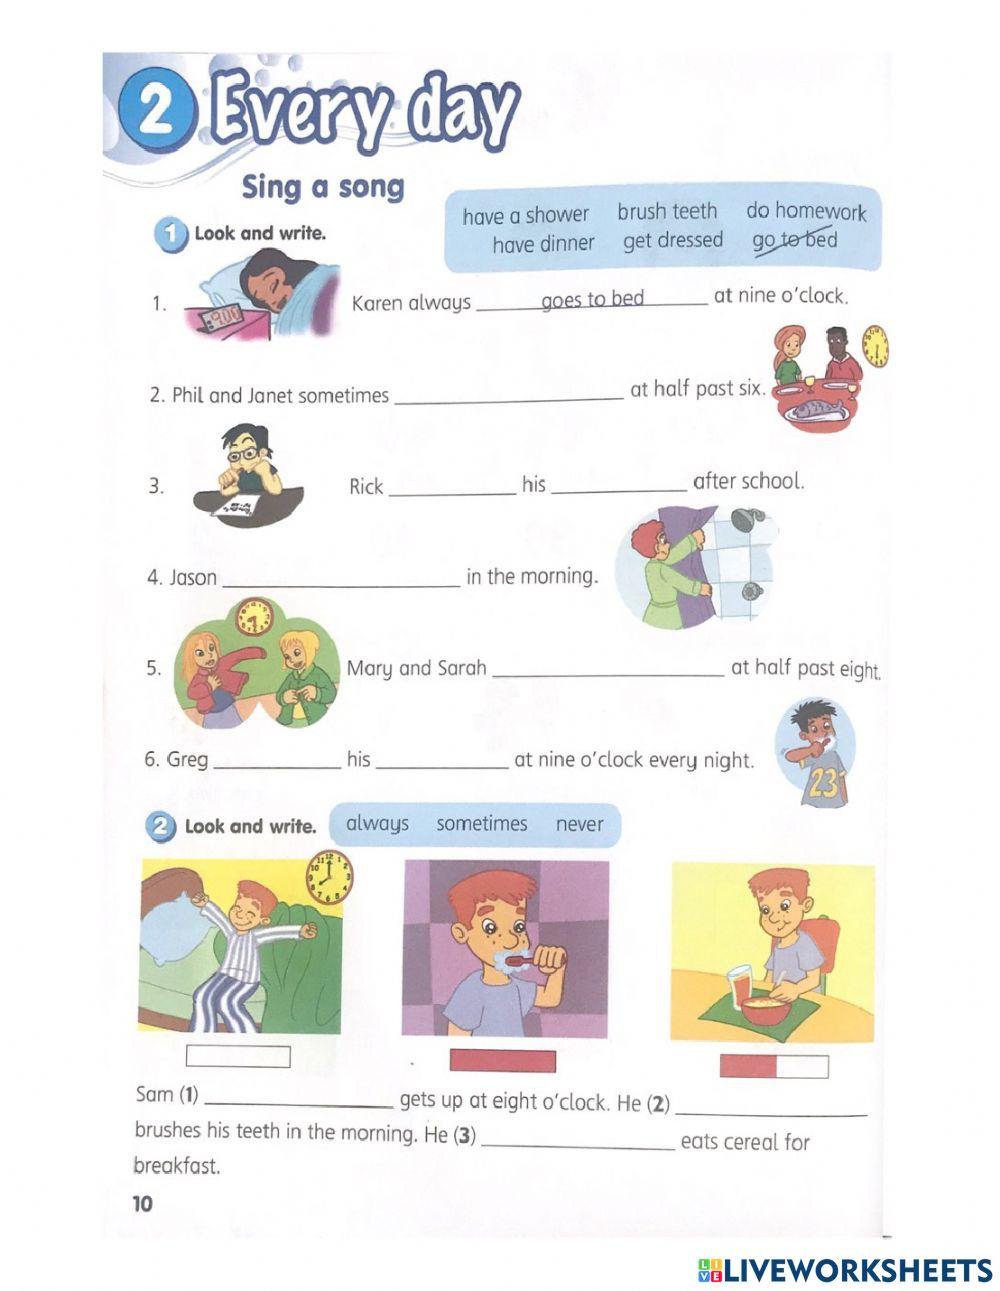 MODULE 2: Everyday (Sing a song)